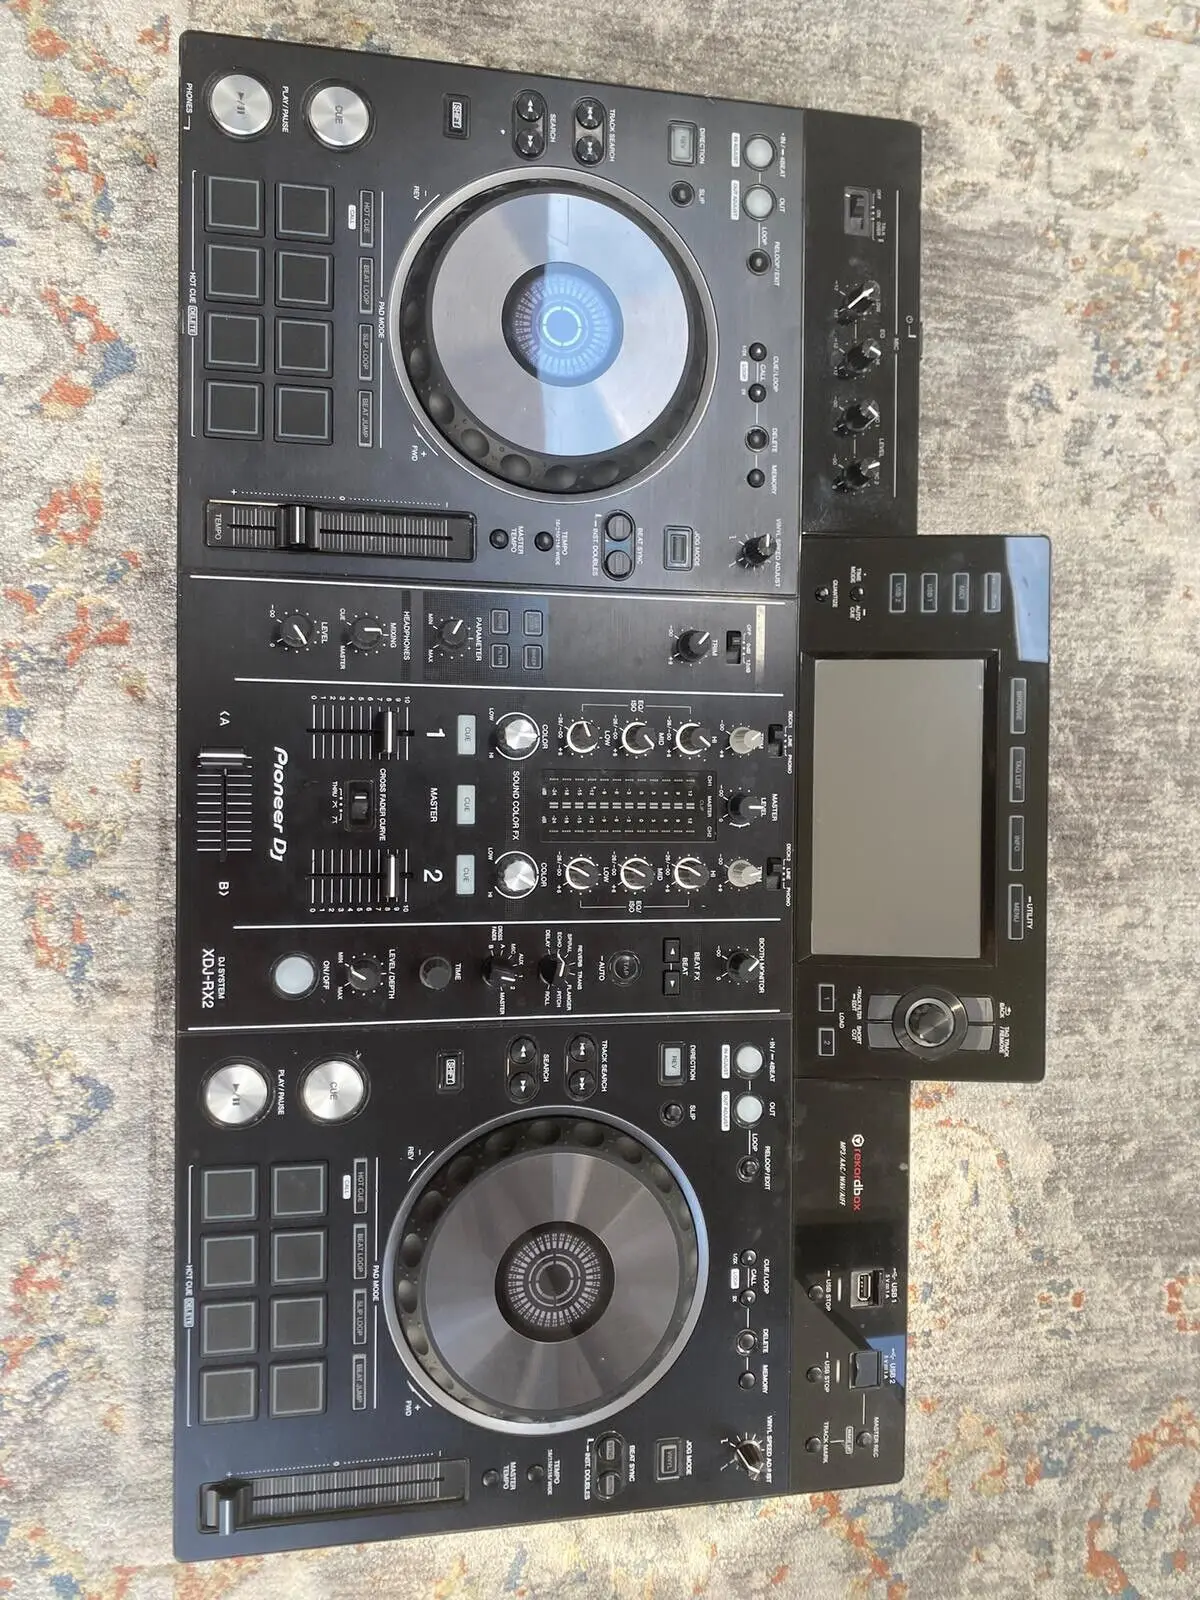 

HOT SALES Affirm Pioneer XDJ-RX / XDJ-RX2 DJ Controller With 7' Touchscreen